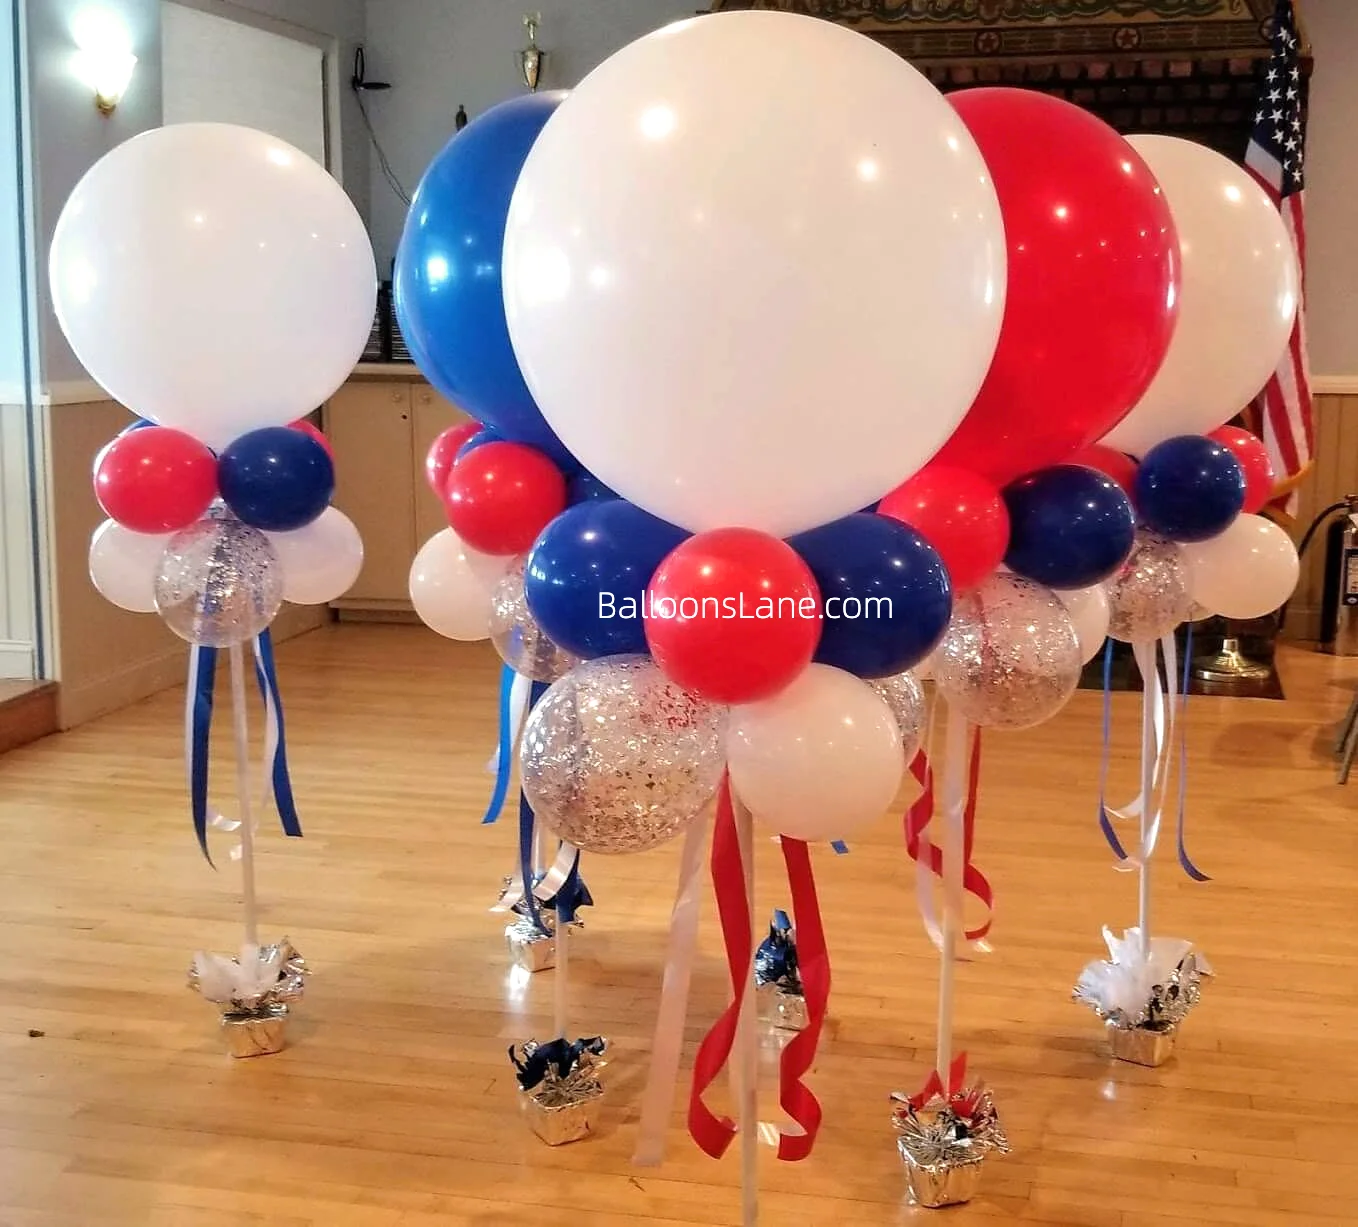 Balloon bouquet of red, white, and blue latex balloons at the entrance of the school